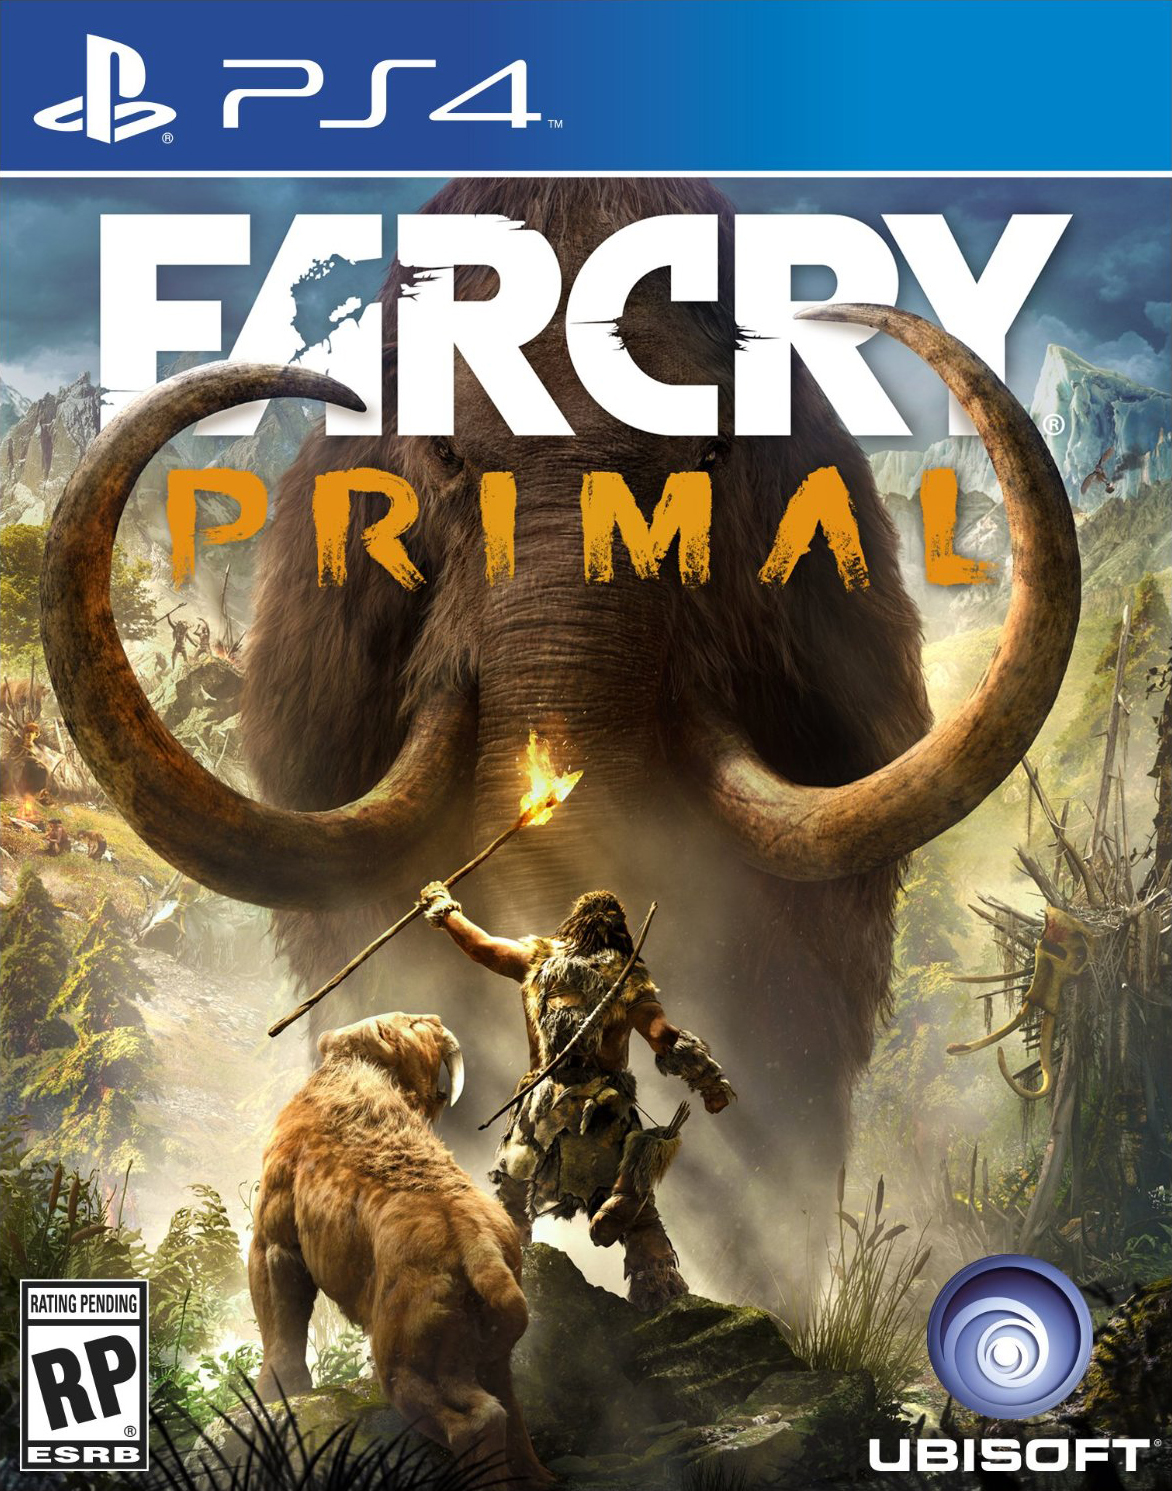 The latest entry in the Far Cry series goes Primal, taking gamers back to 10,000 BC